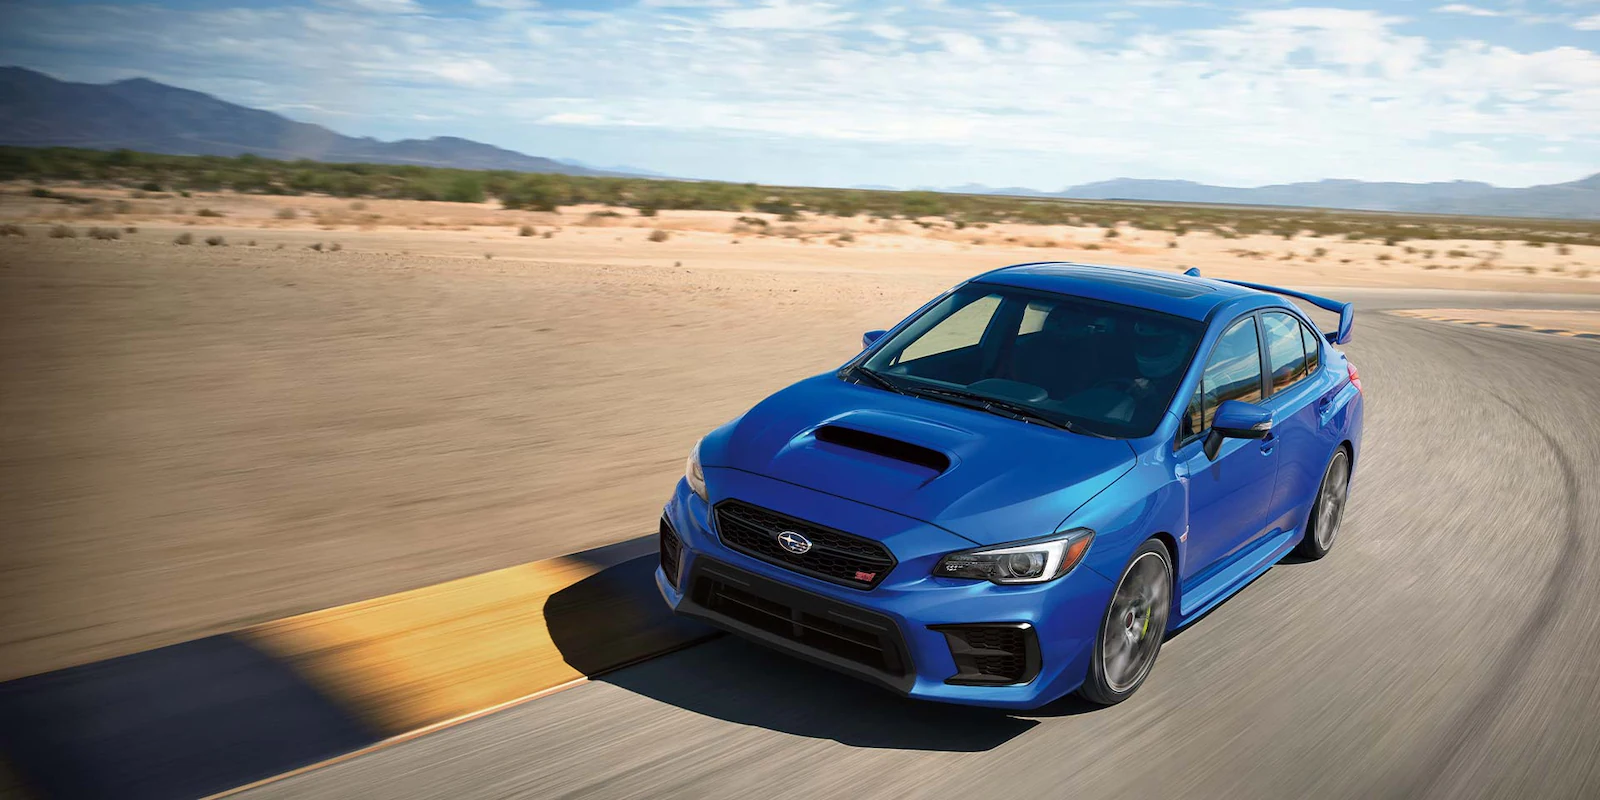 2021 WRX STI driving on a desert highway with mountains in the background.